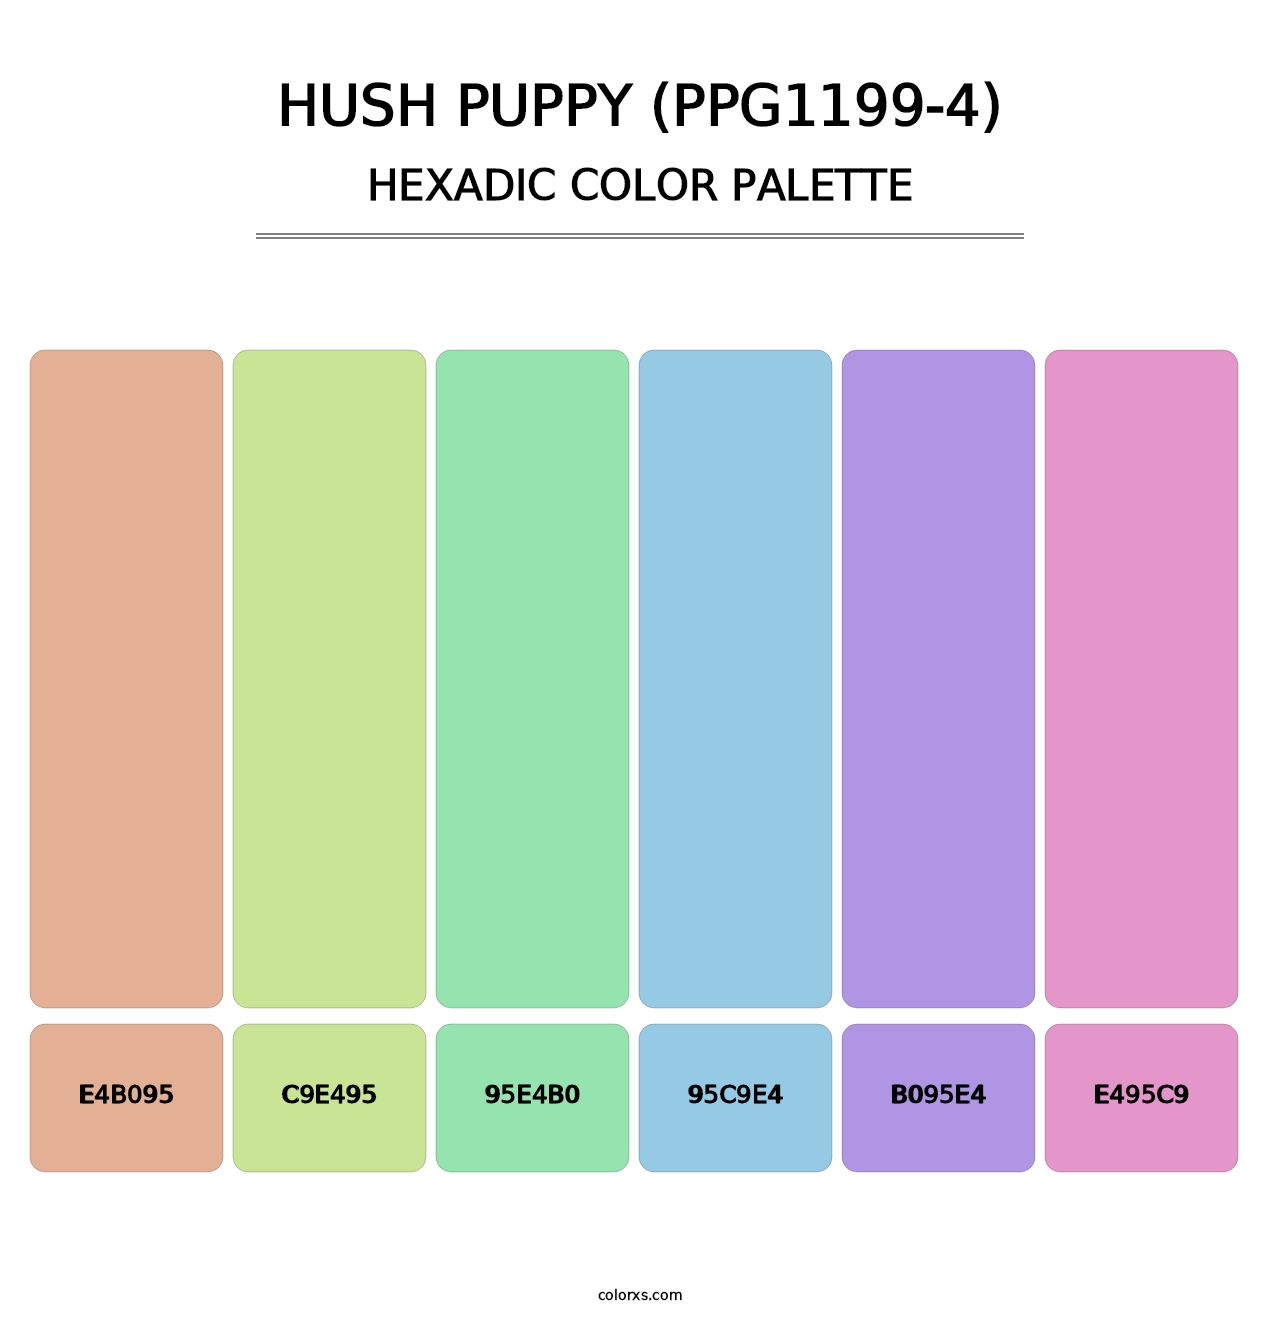 Hush Puppy (PPG1199-4) - Hexadic Color Palette